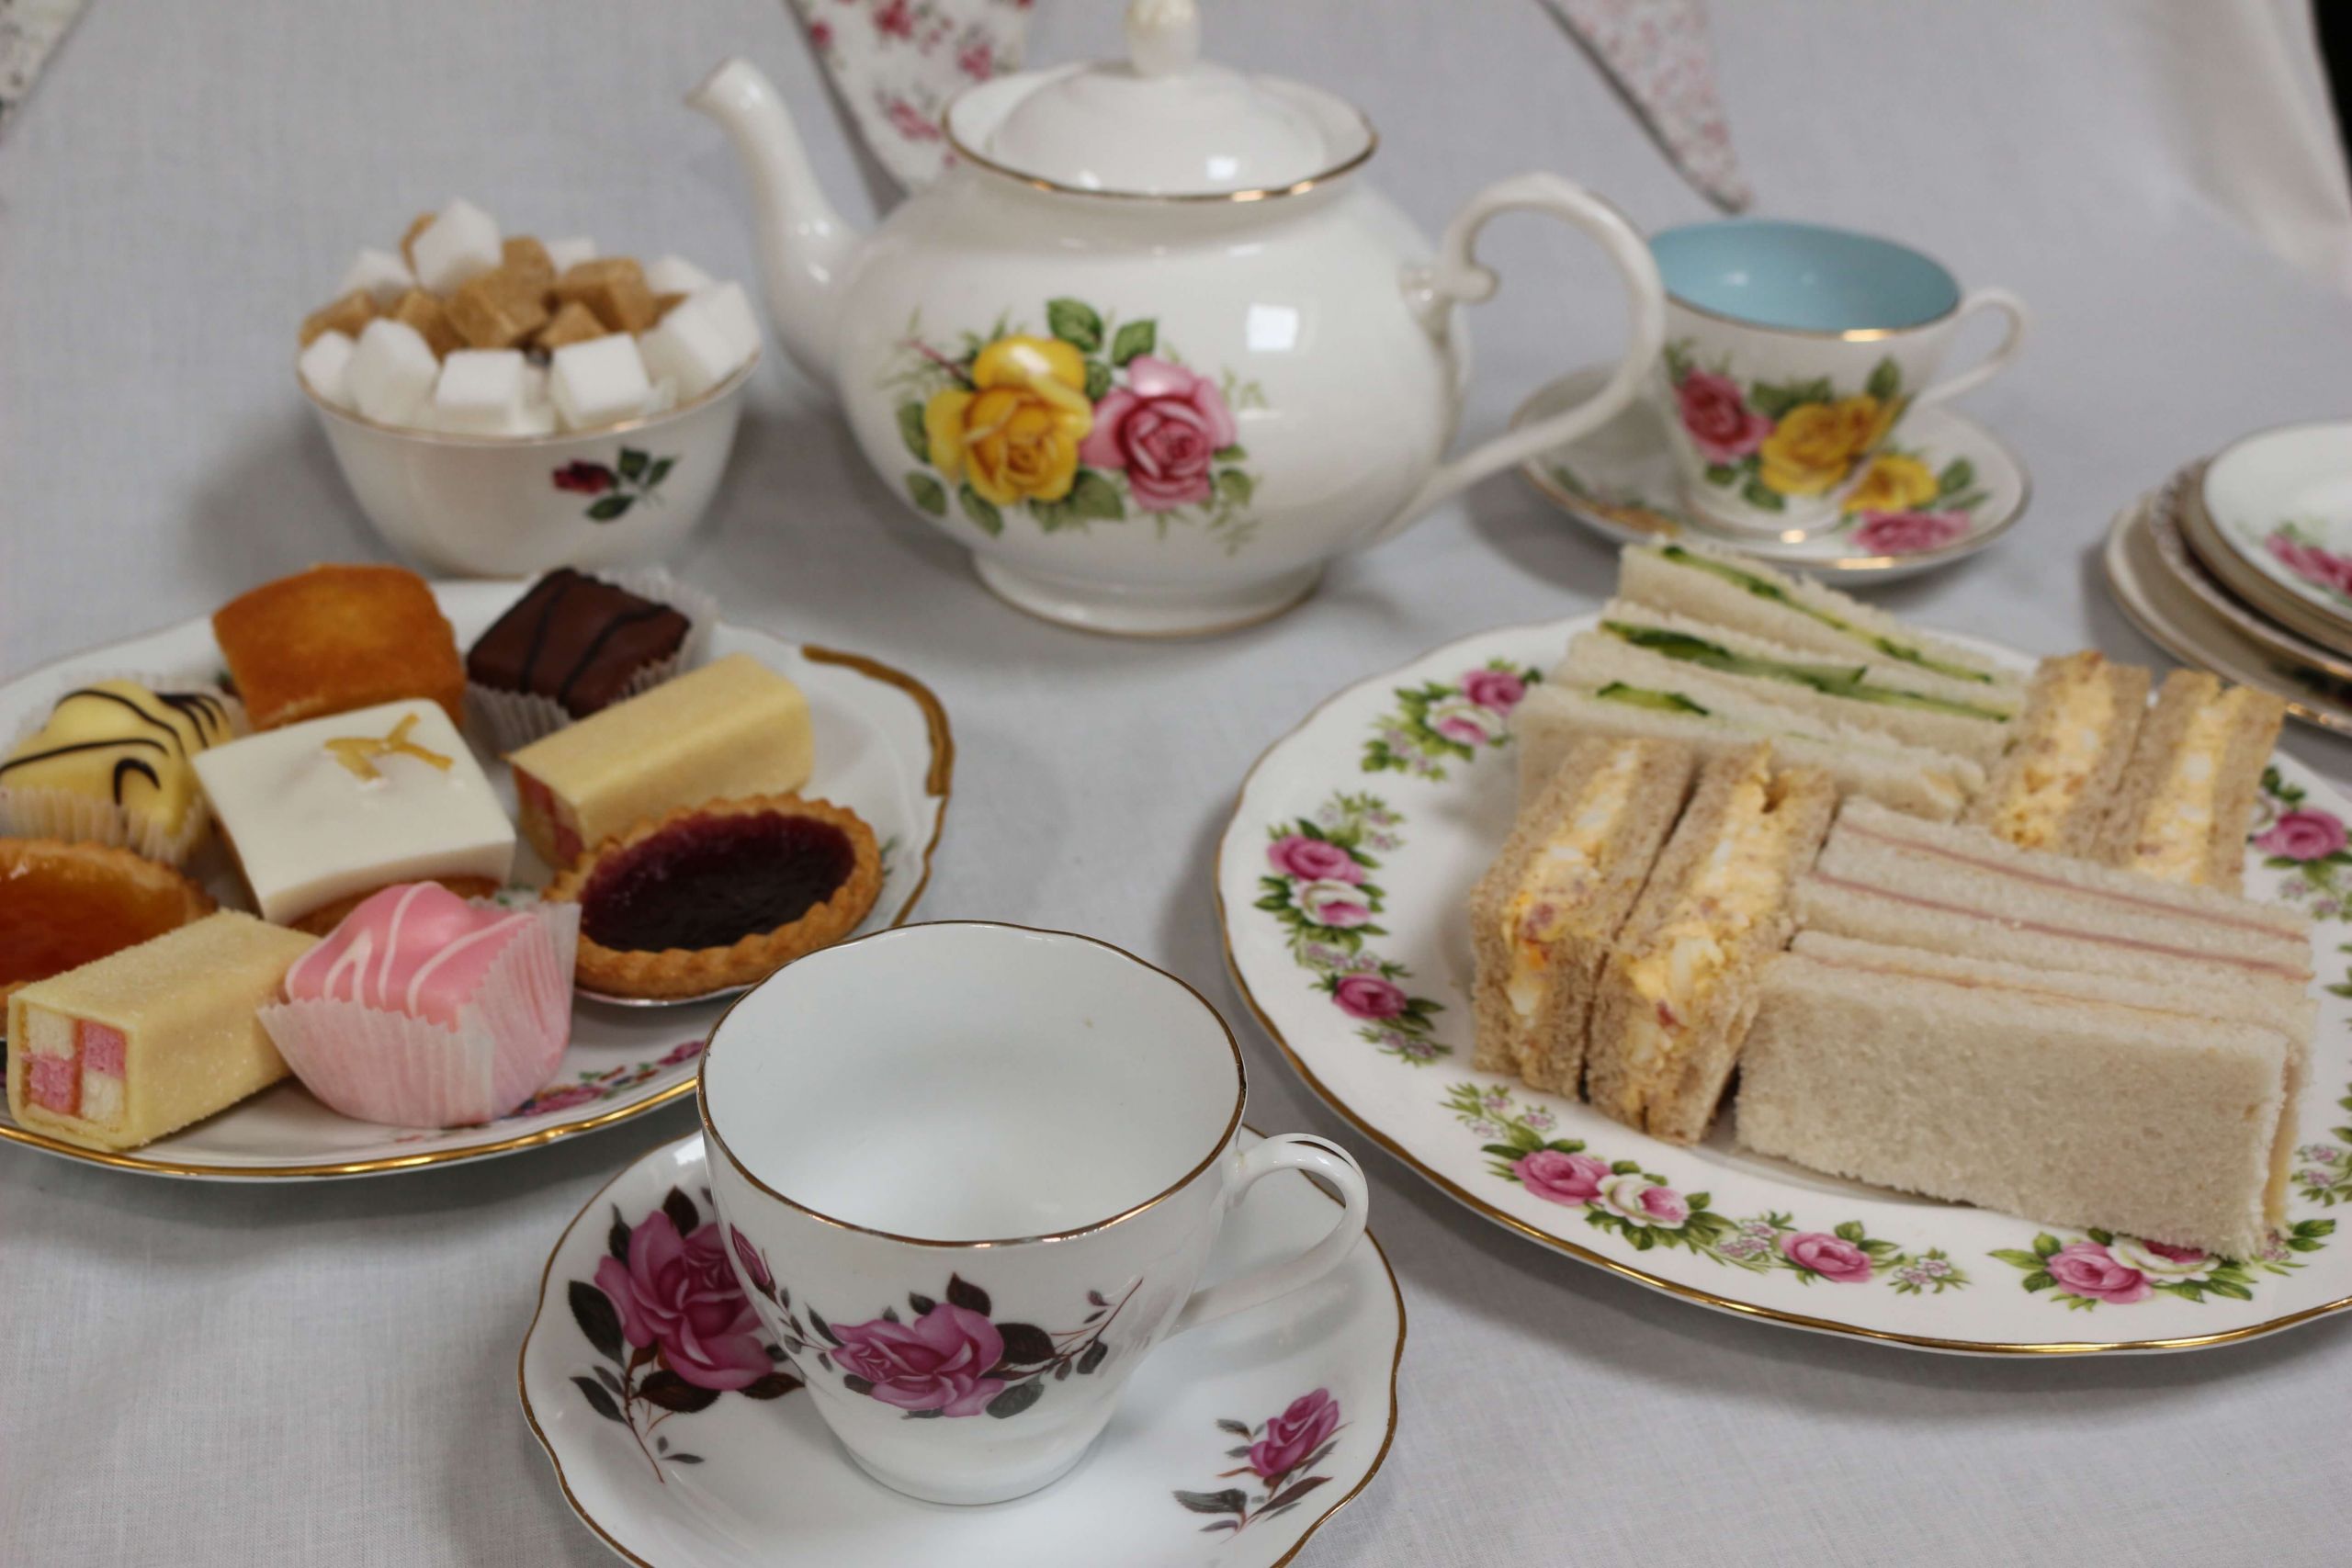 High Tea Party Ideas
 10 Ideas to make your Afternoon Tea Party extra special